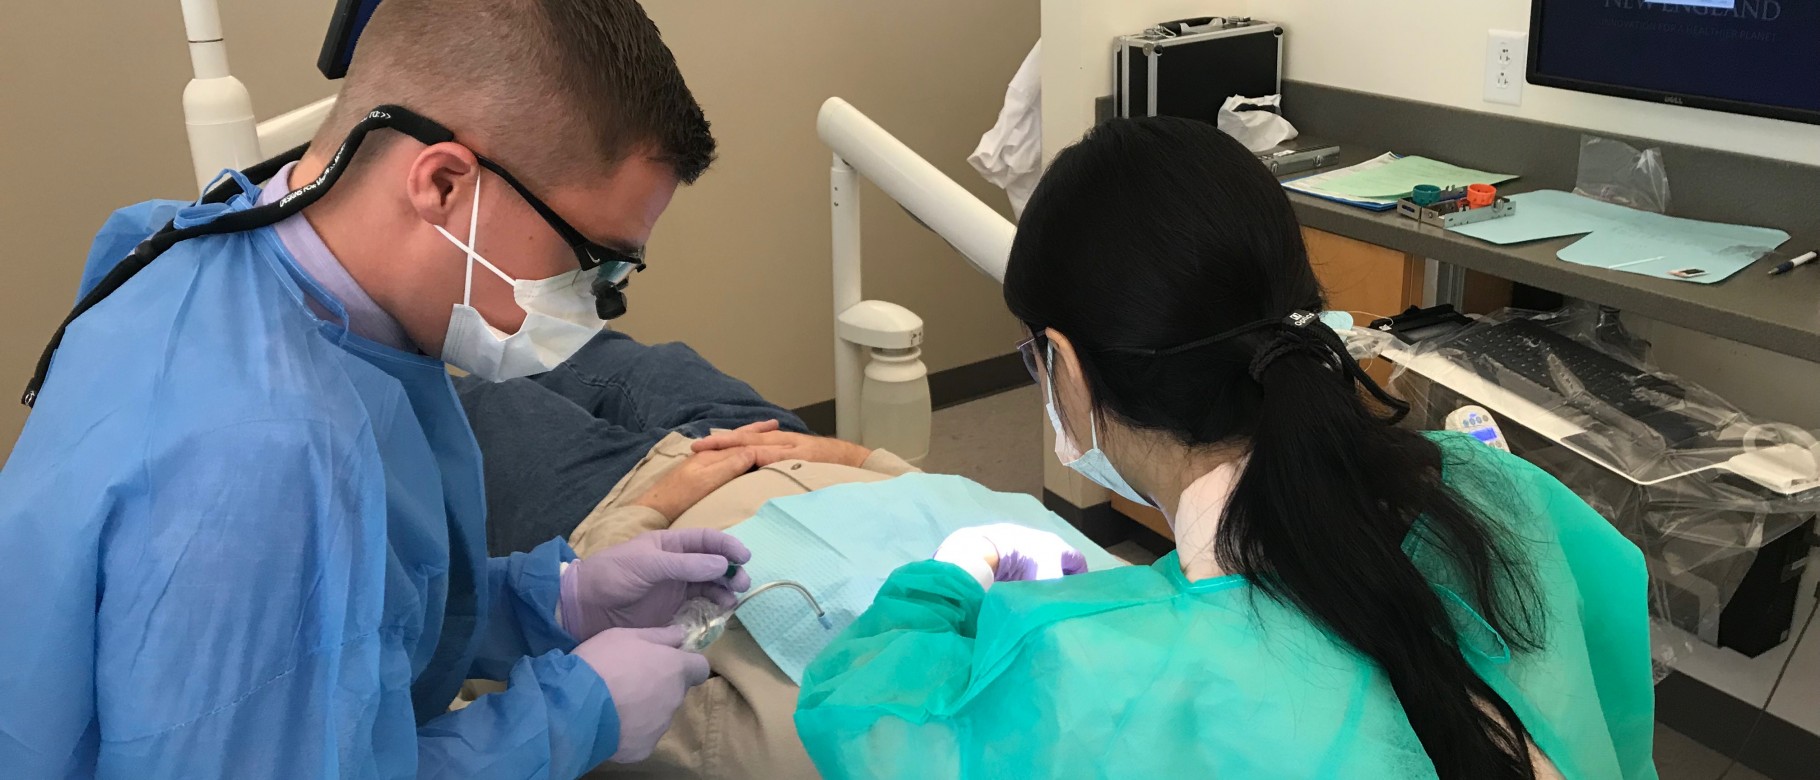 Students provided free care to more than 100 patients in the Oral Health Center